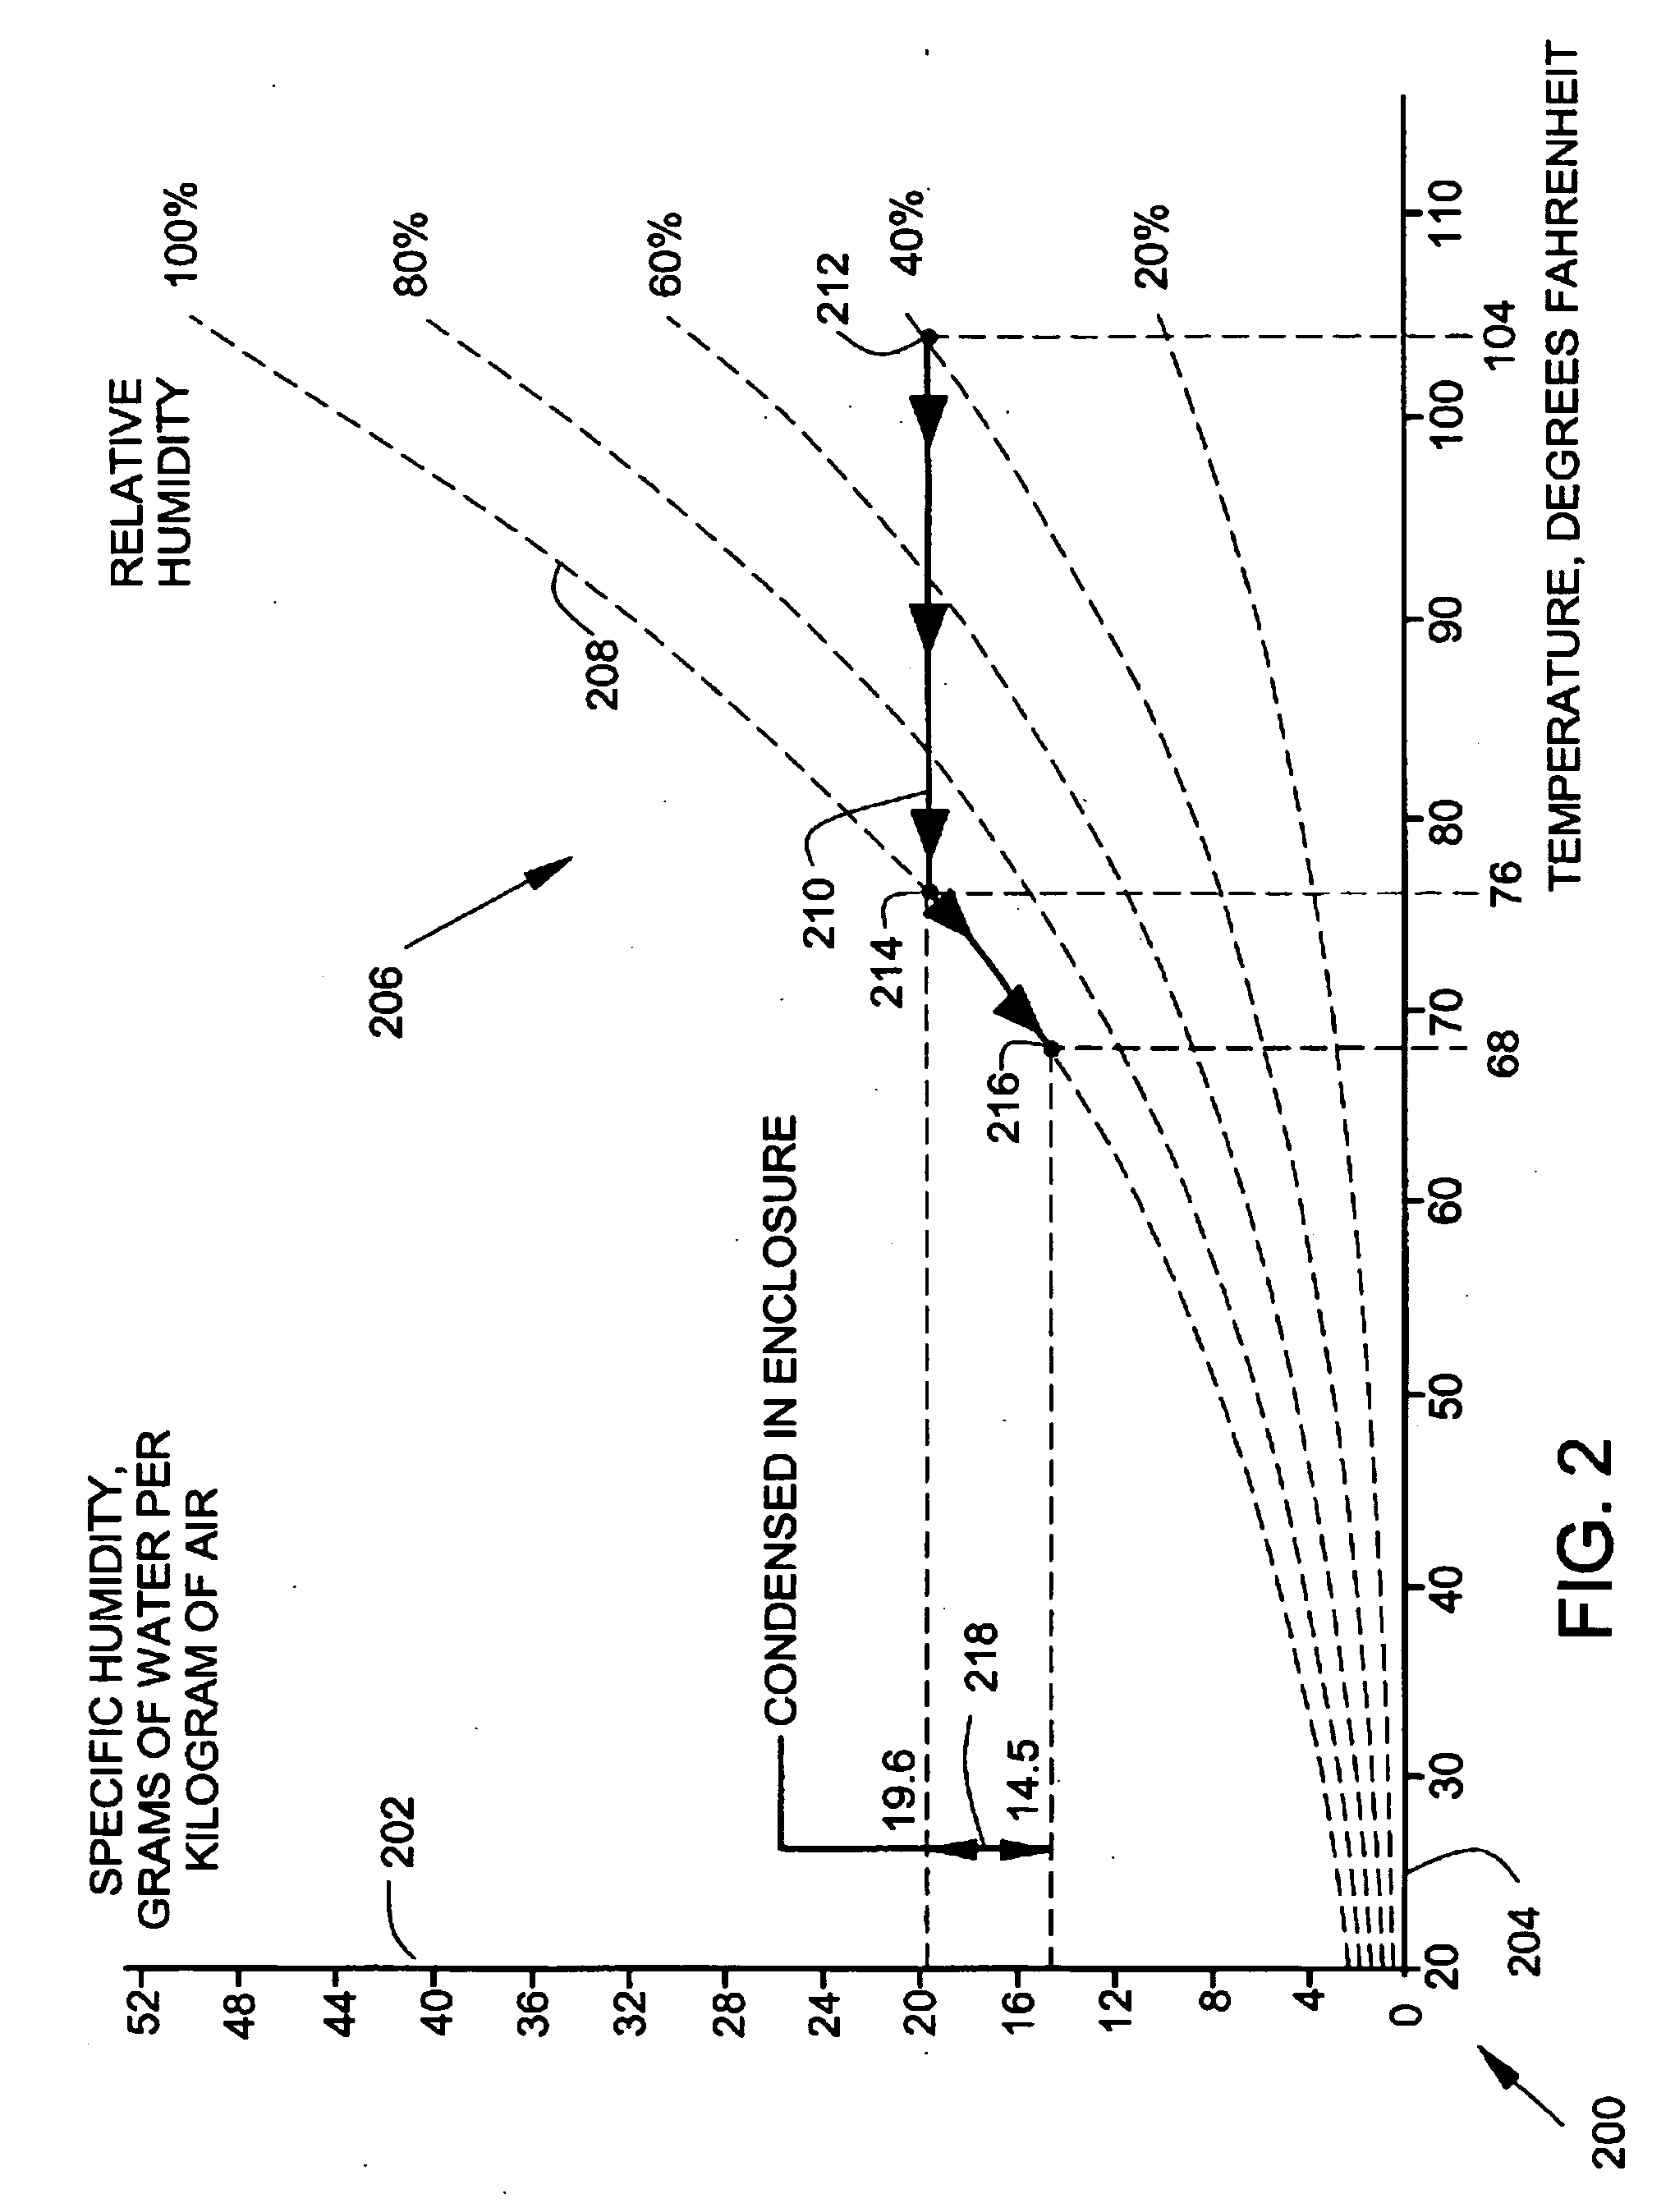 Condensation compensation in a motion control system